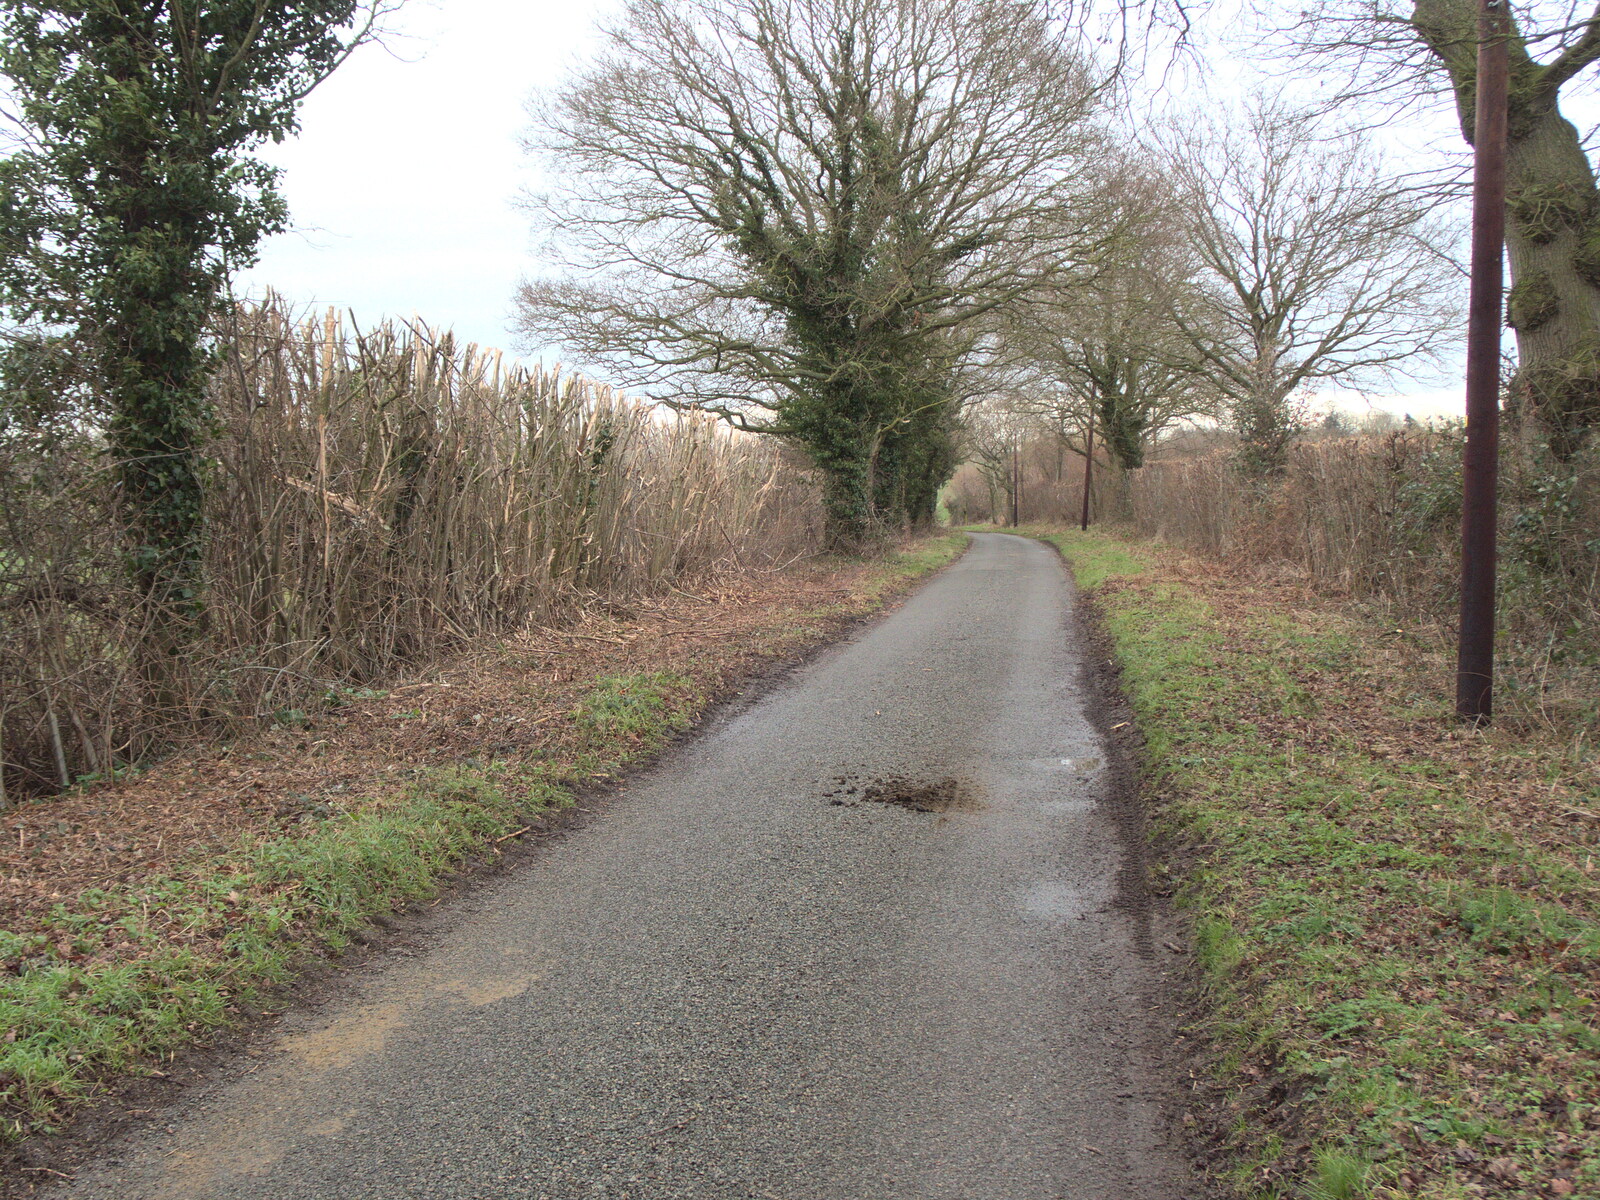 The hedge in Thrandeston has been bushwacked from The Swan Inn: An Epilogue, Brome, Suffolk - 17th February 2022